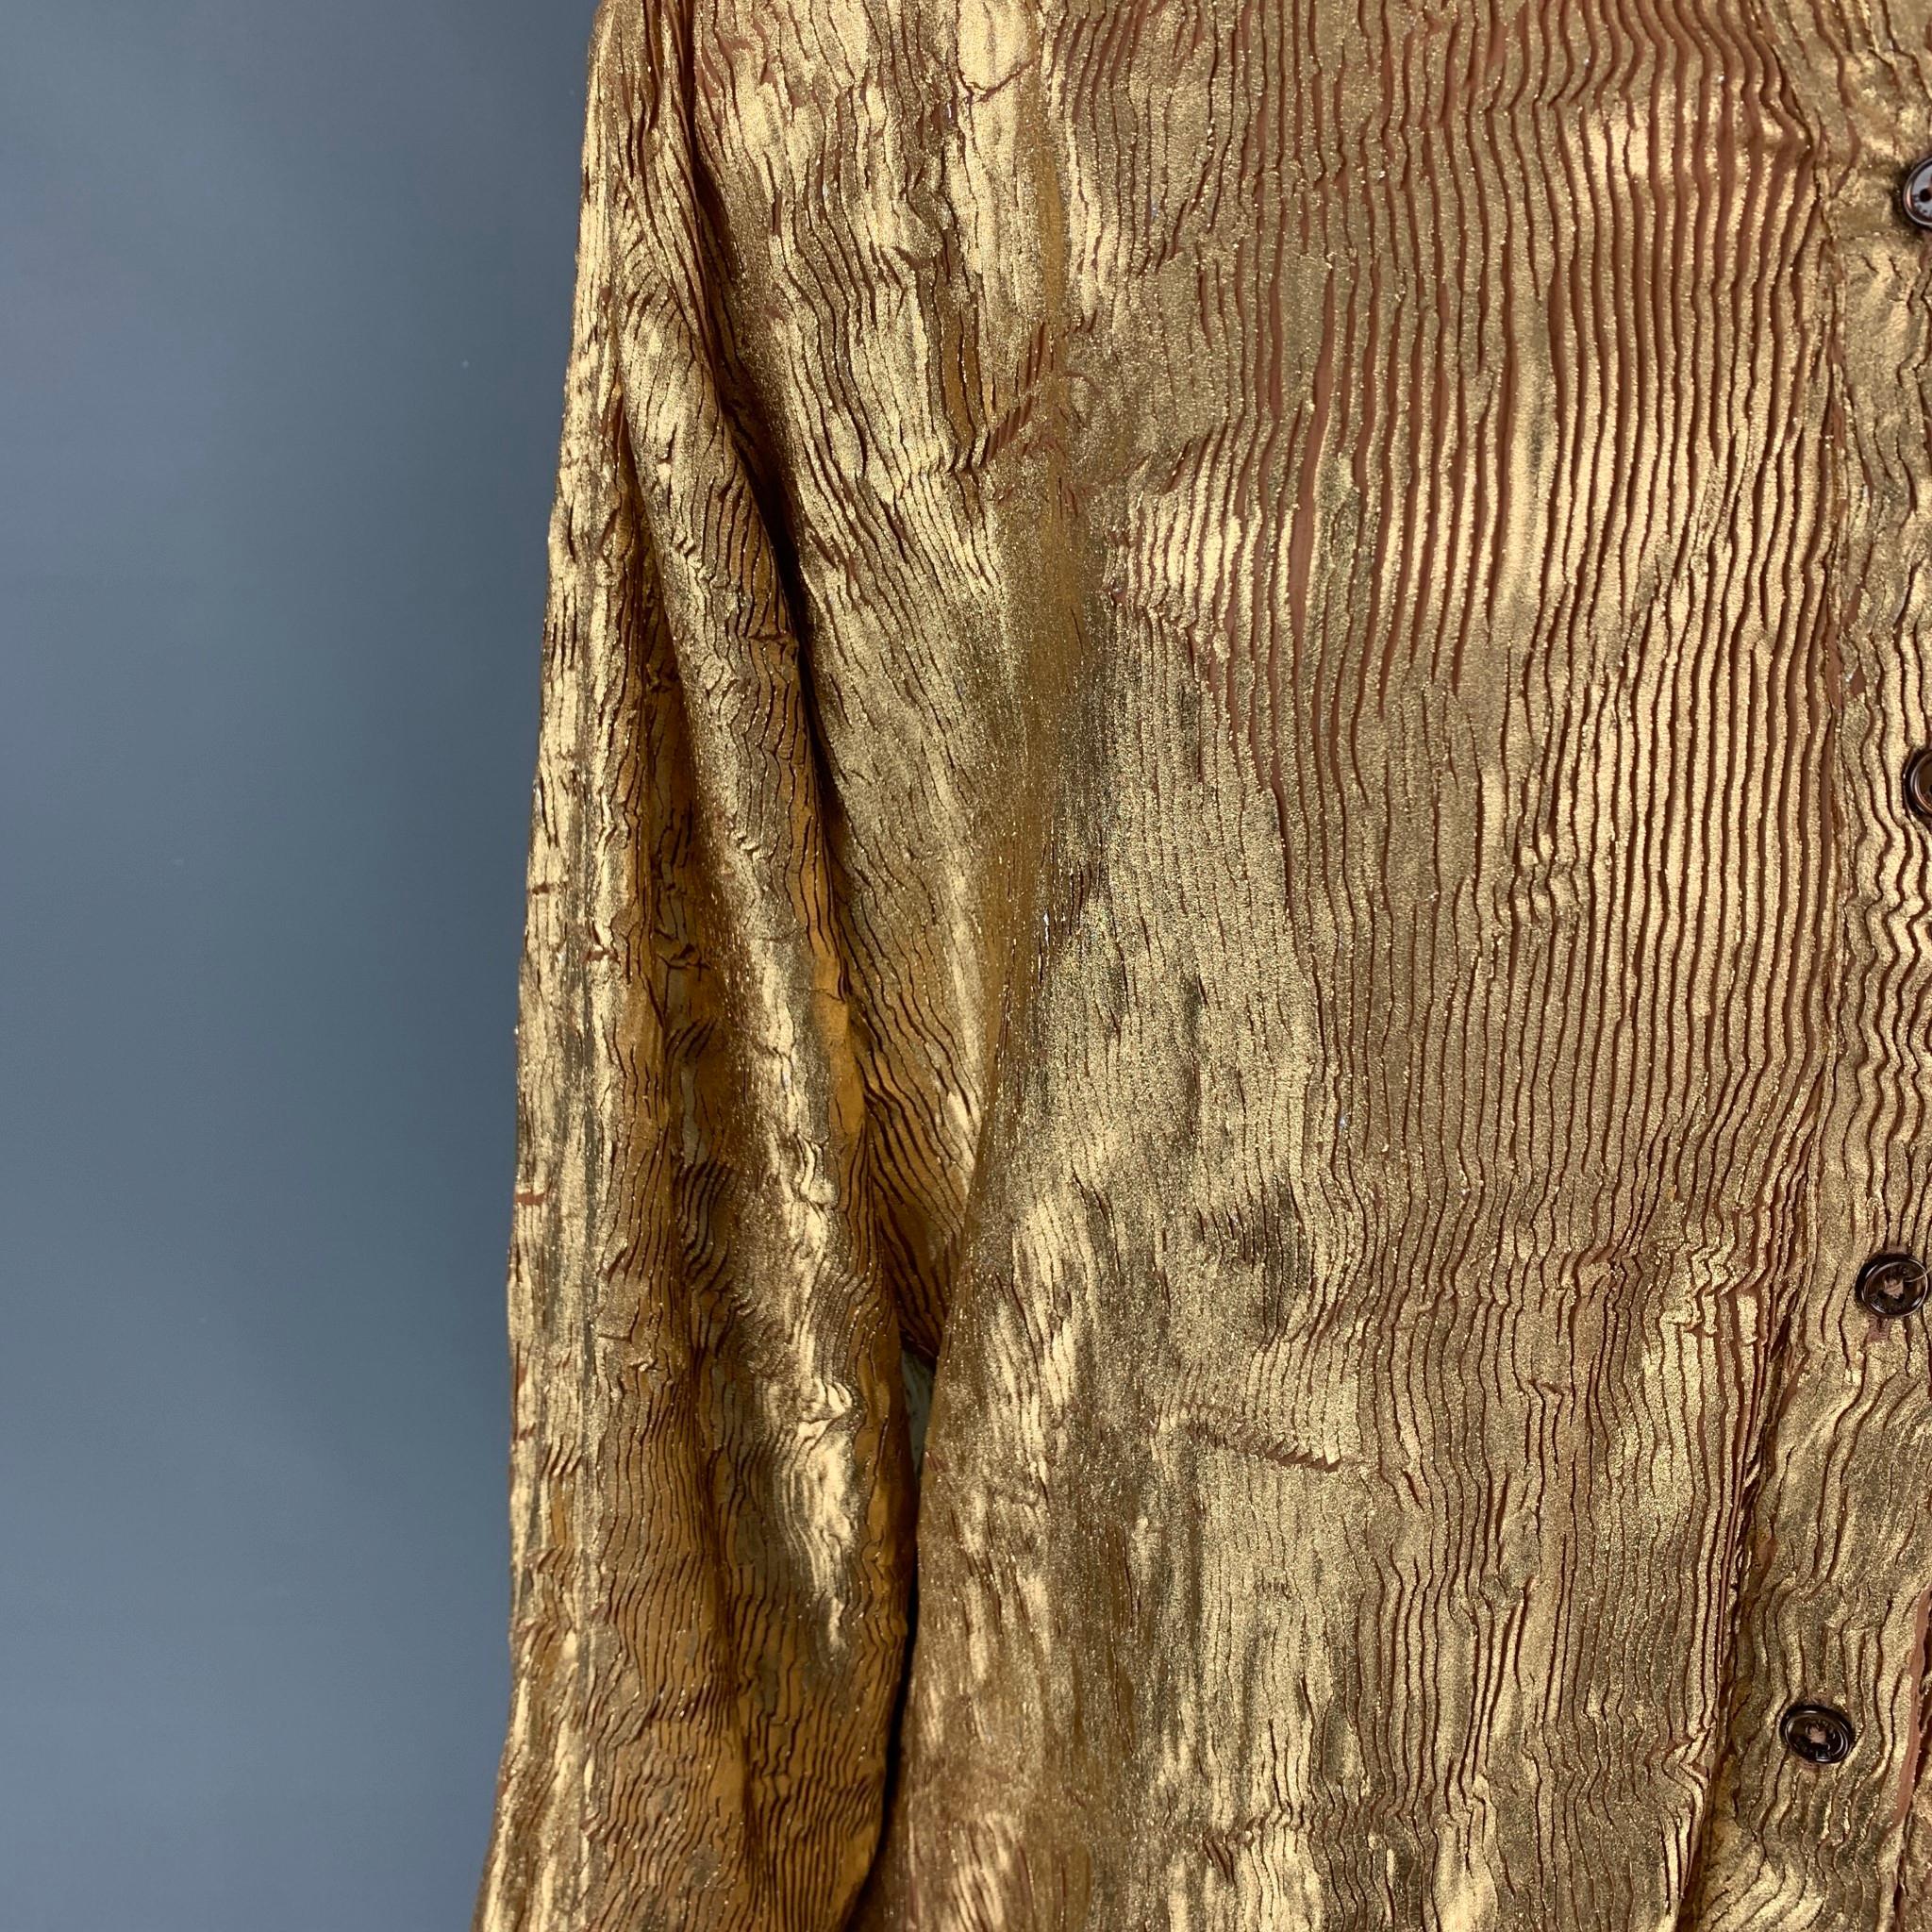 SIES MARJAN shirt comes in a gold crackled material featuring a loose fit, patch pocket, spread collar, and a button up closure. 

Excellent Pre-Owned Condition. Fabric tag removed.
Marked: 2

Measurements:

Shoulder: 19 in.
Bust: 40 in.
Sleeve: